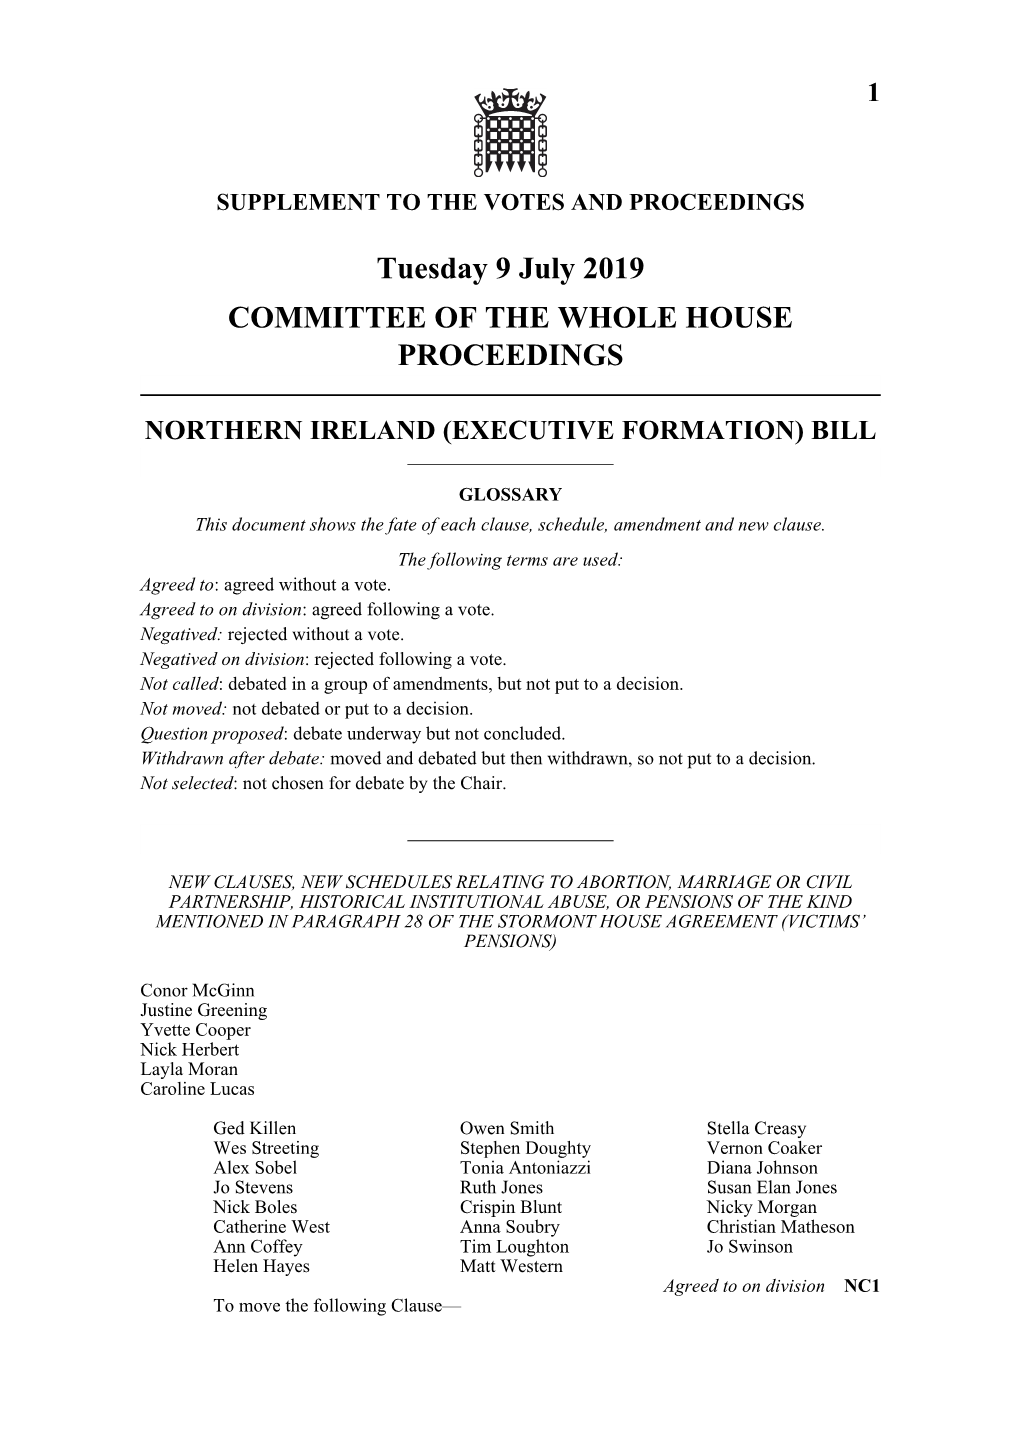 Tuesday 9 July 2019 COMMITTEE of the WHOLE HOUSE PROCEEDINGS